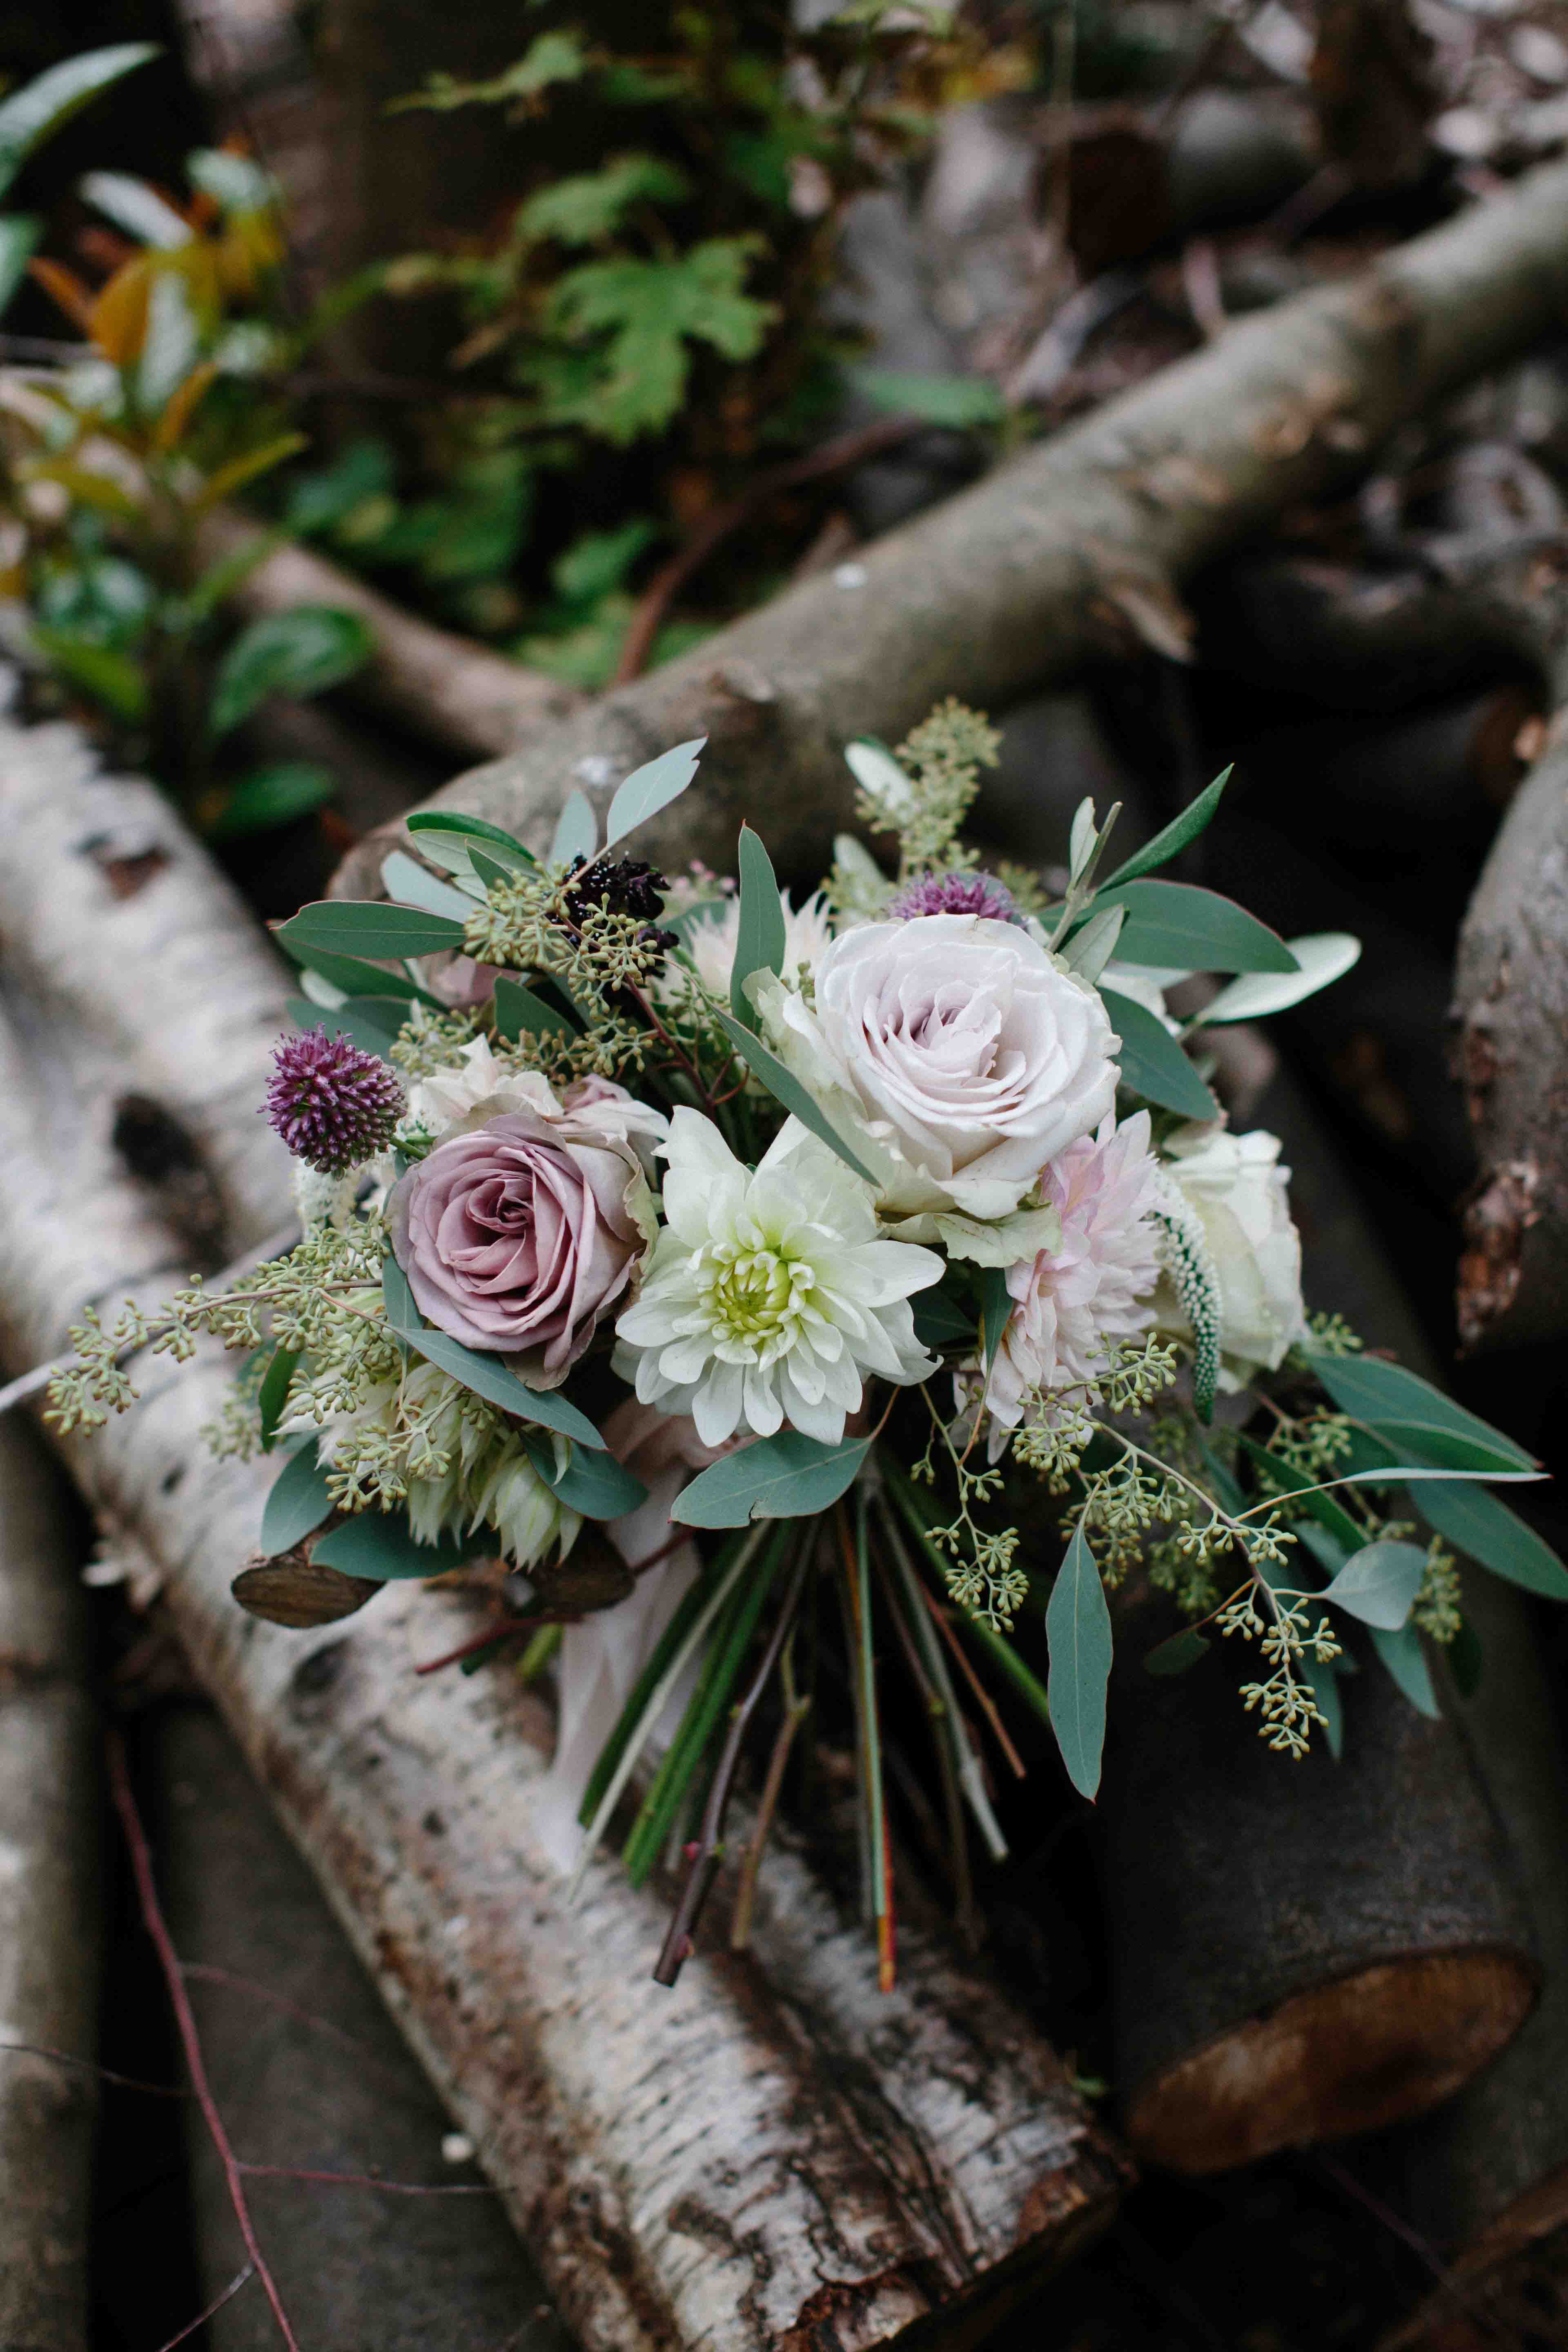 Bouquet on a pile of logs.